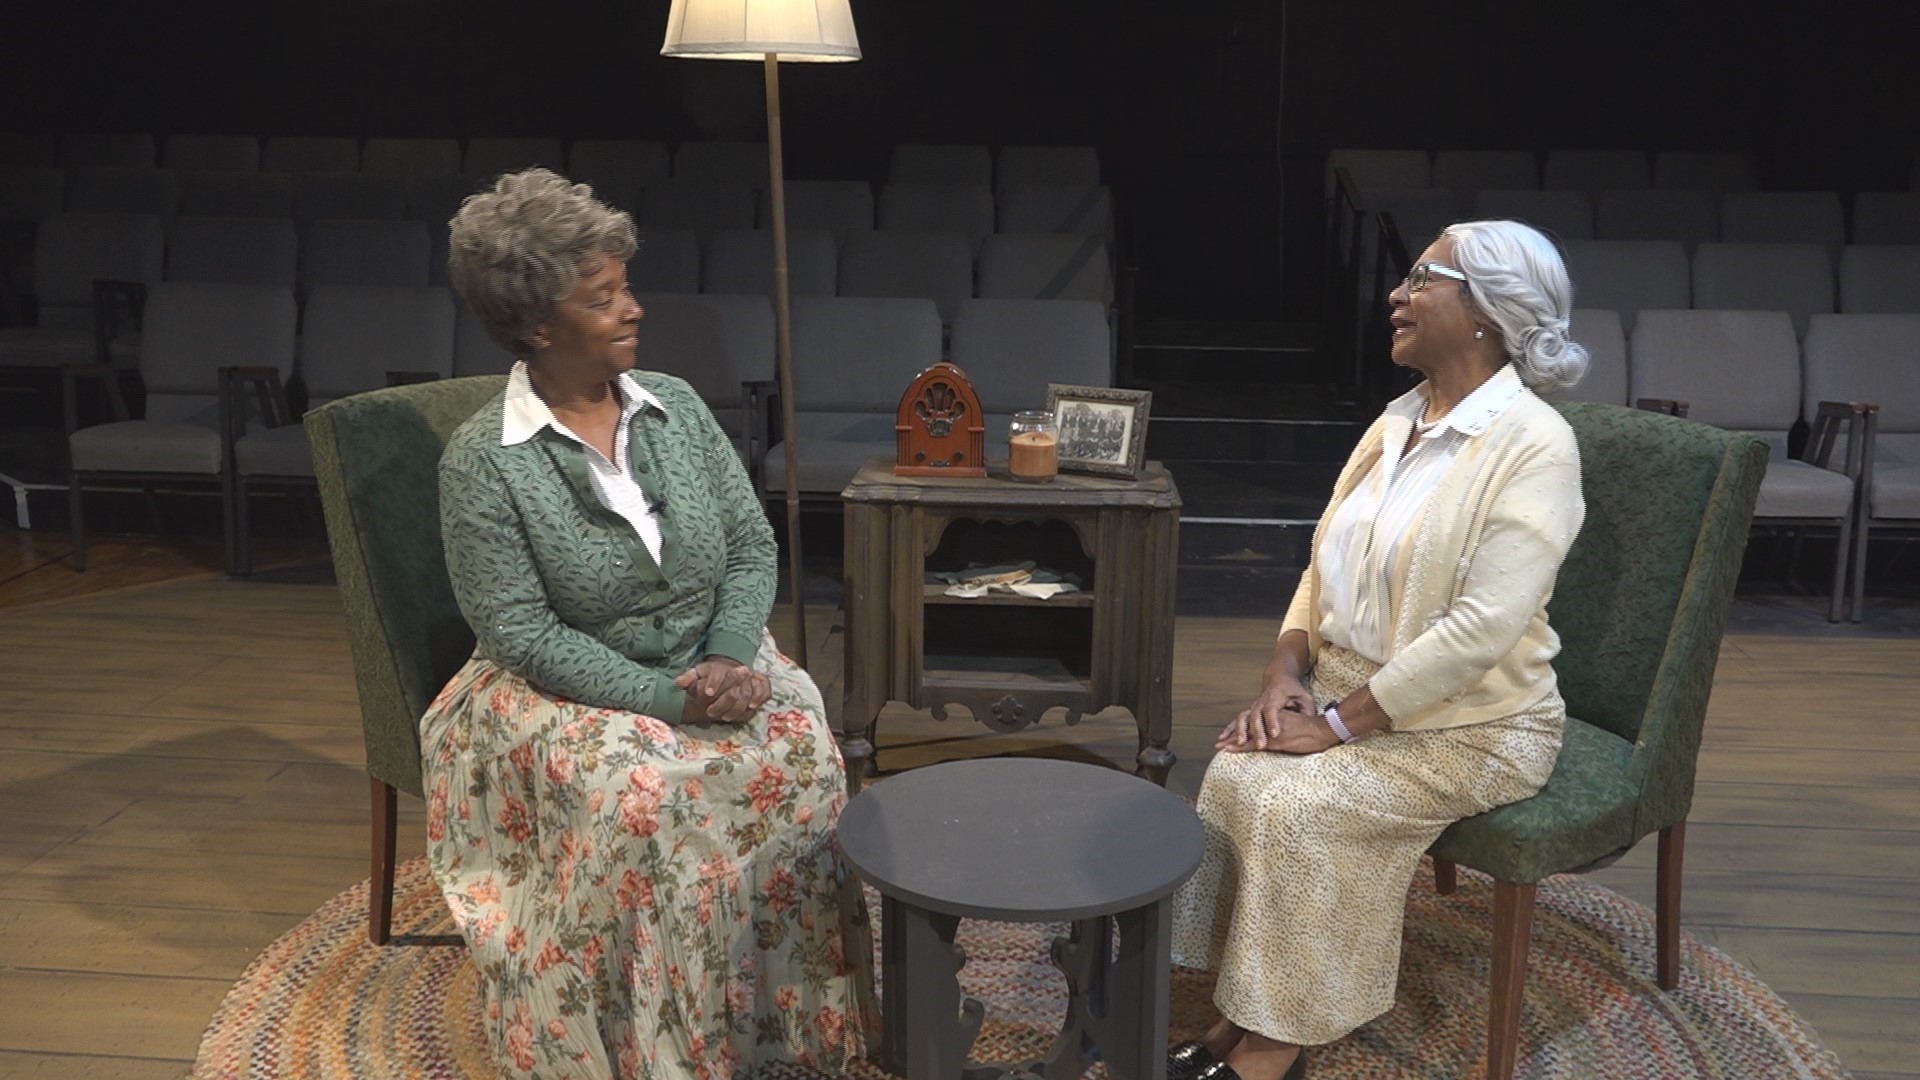 The play shares the true stories of two African- American centenarian sisters who broke barriers as they witnessed history from the late 1800s to the late 1900s.